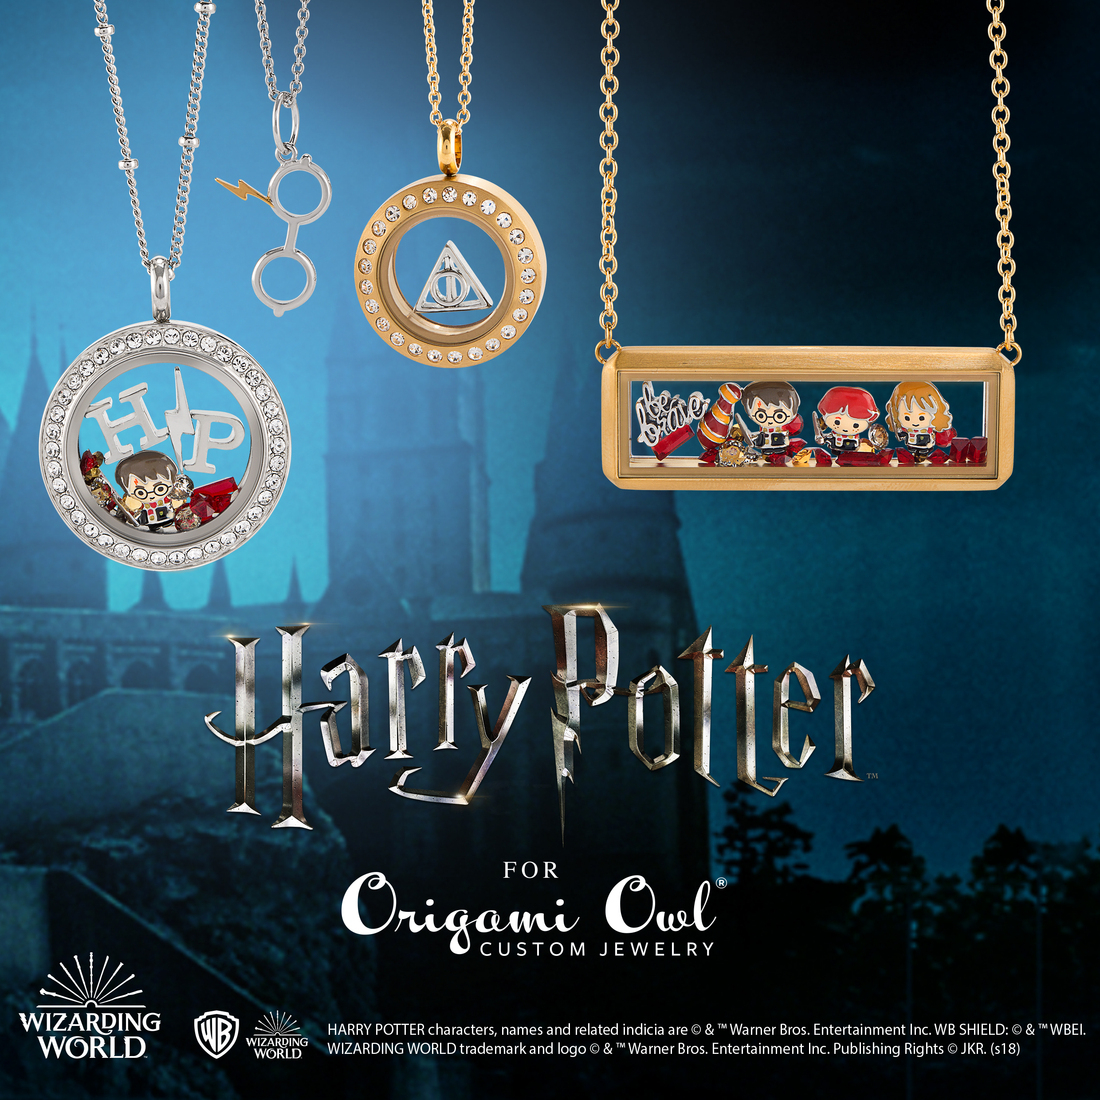 Origami Owl Coupon Introducing The Harry Potter For Origami Owl Its Magical Direct